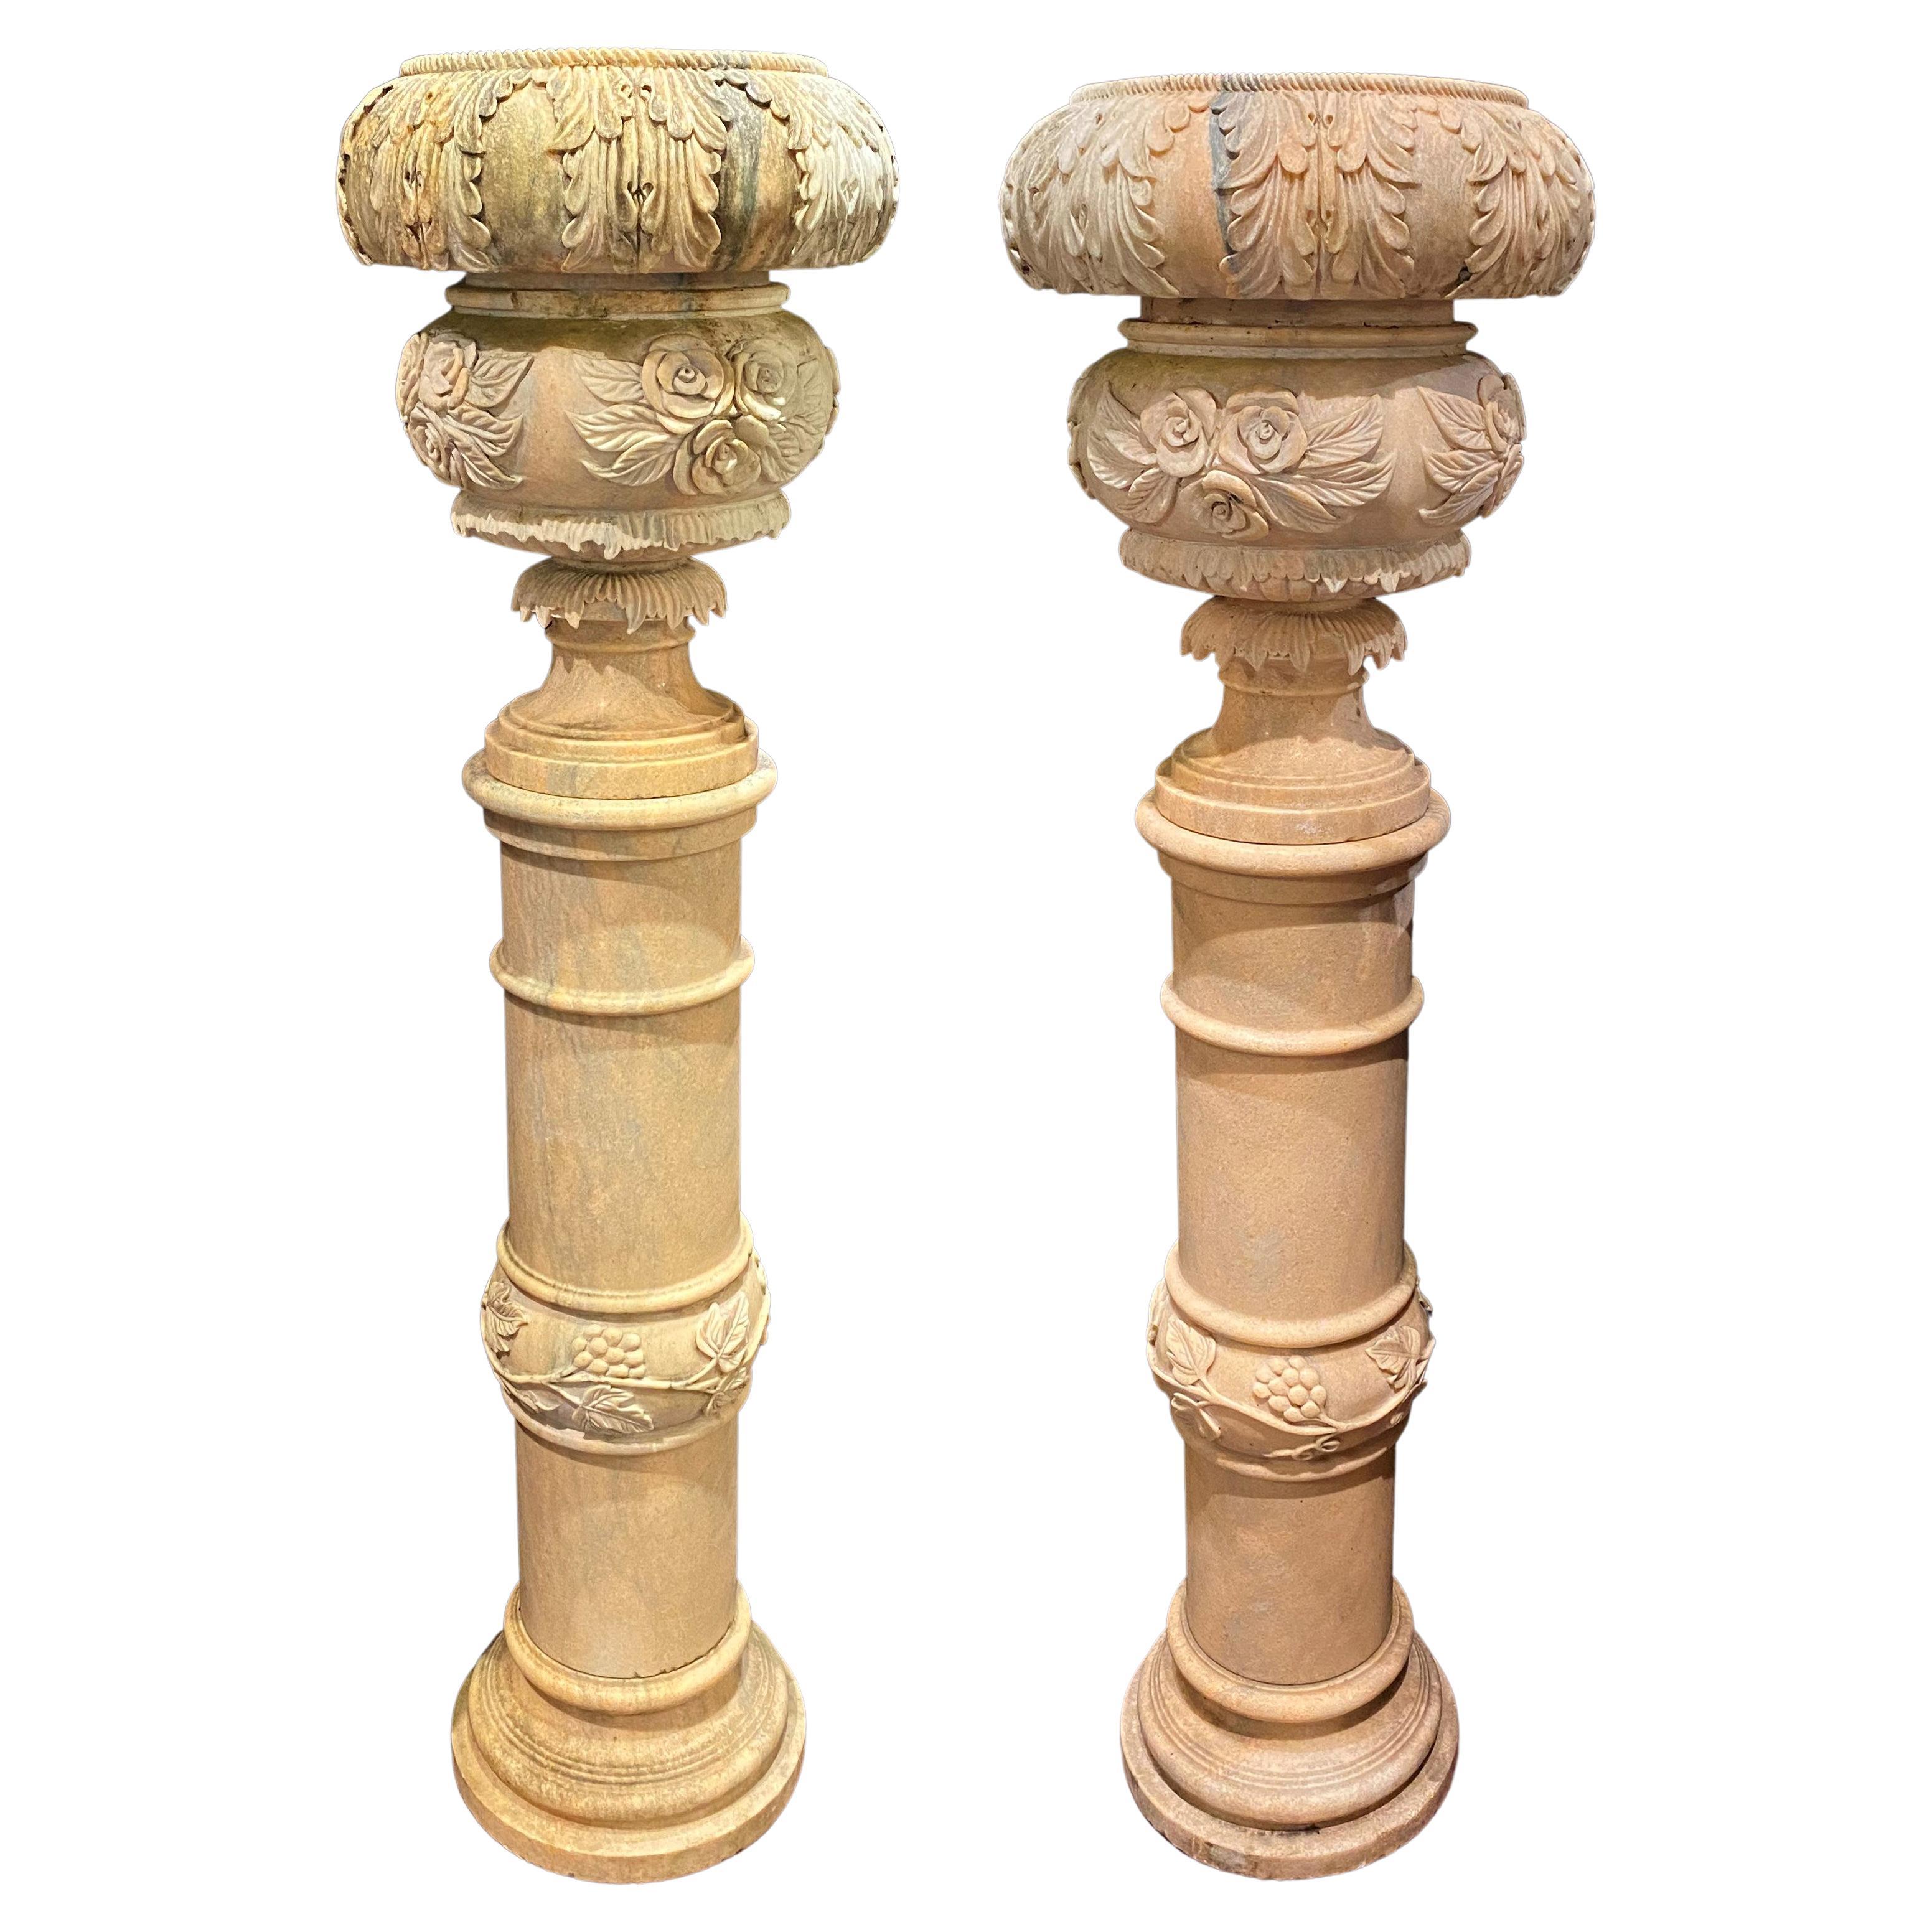 Pair of Large Continental Style Marble Carved Urns on Pedestals